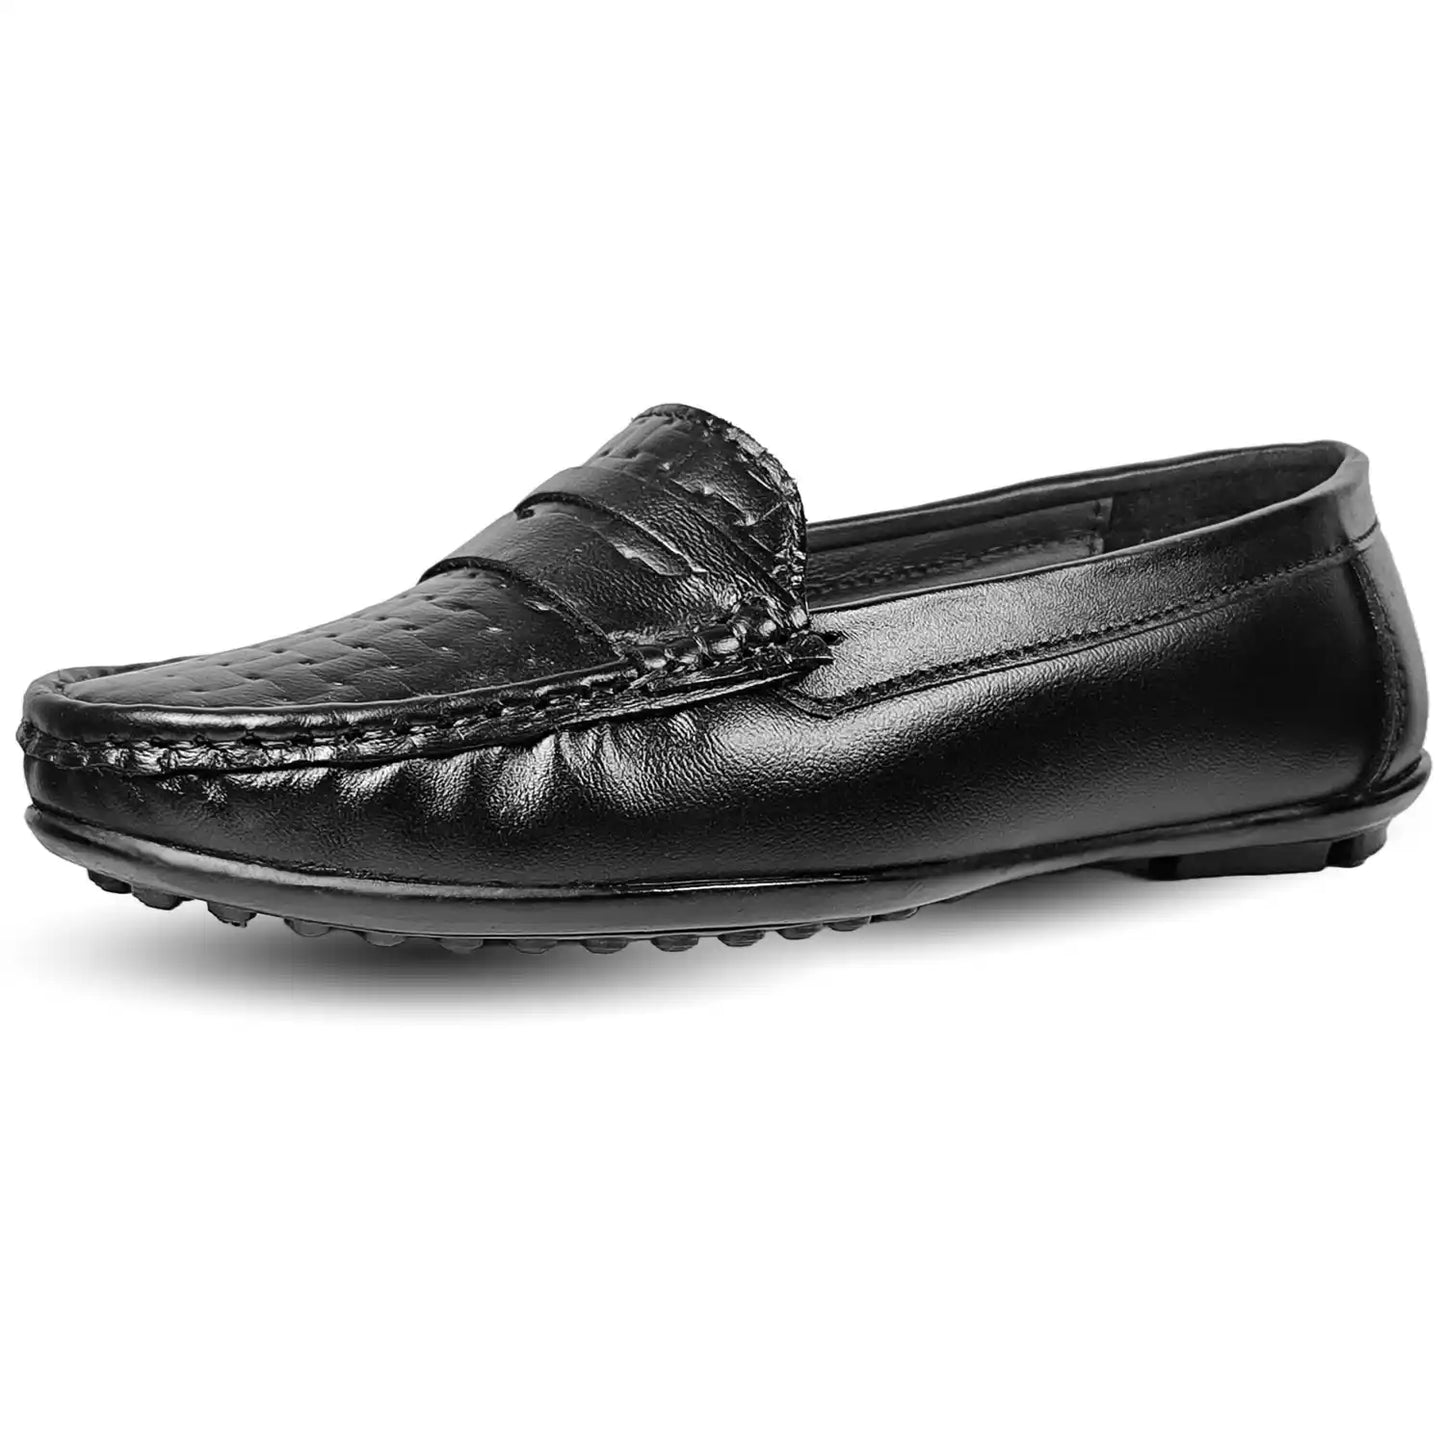 Loafers for WOMEN Pure Leather Slip On Ladies Moccasins Shoes